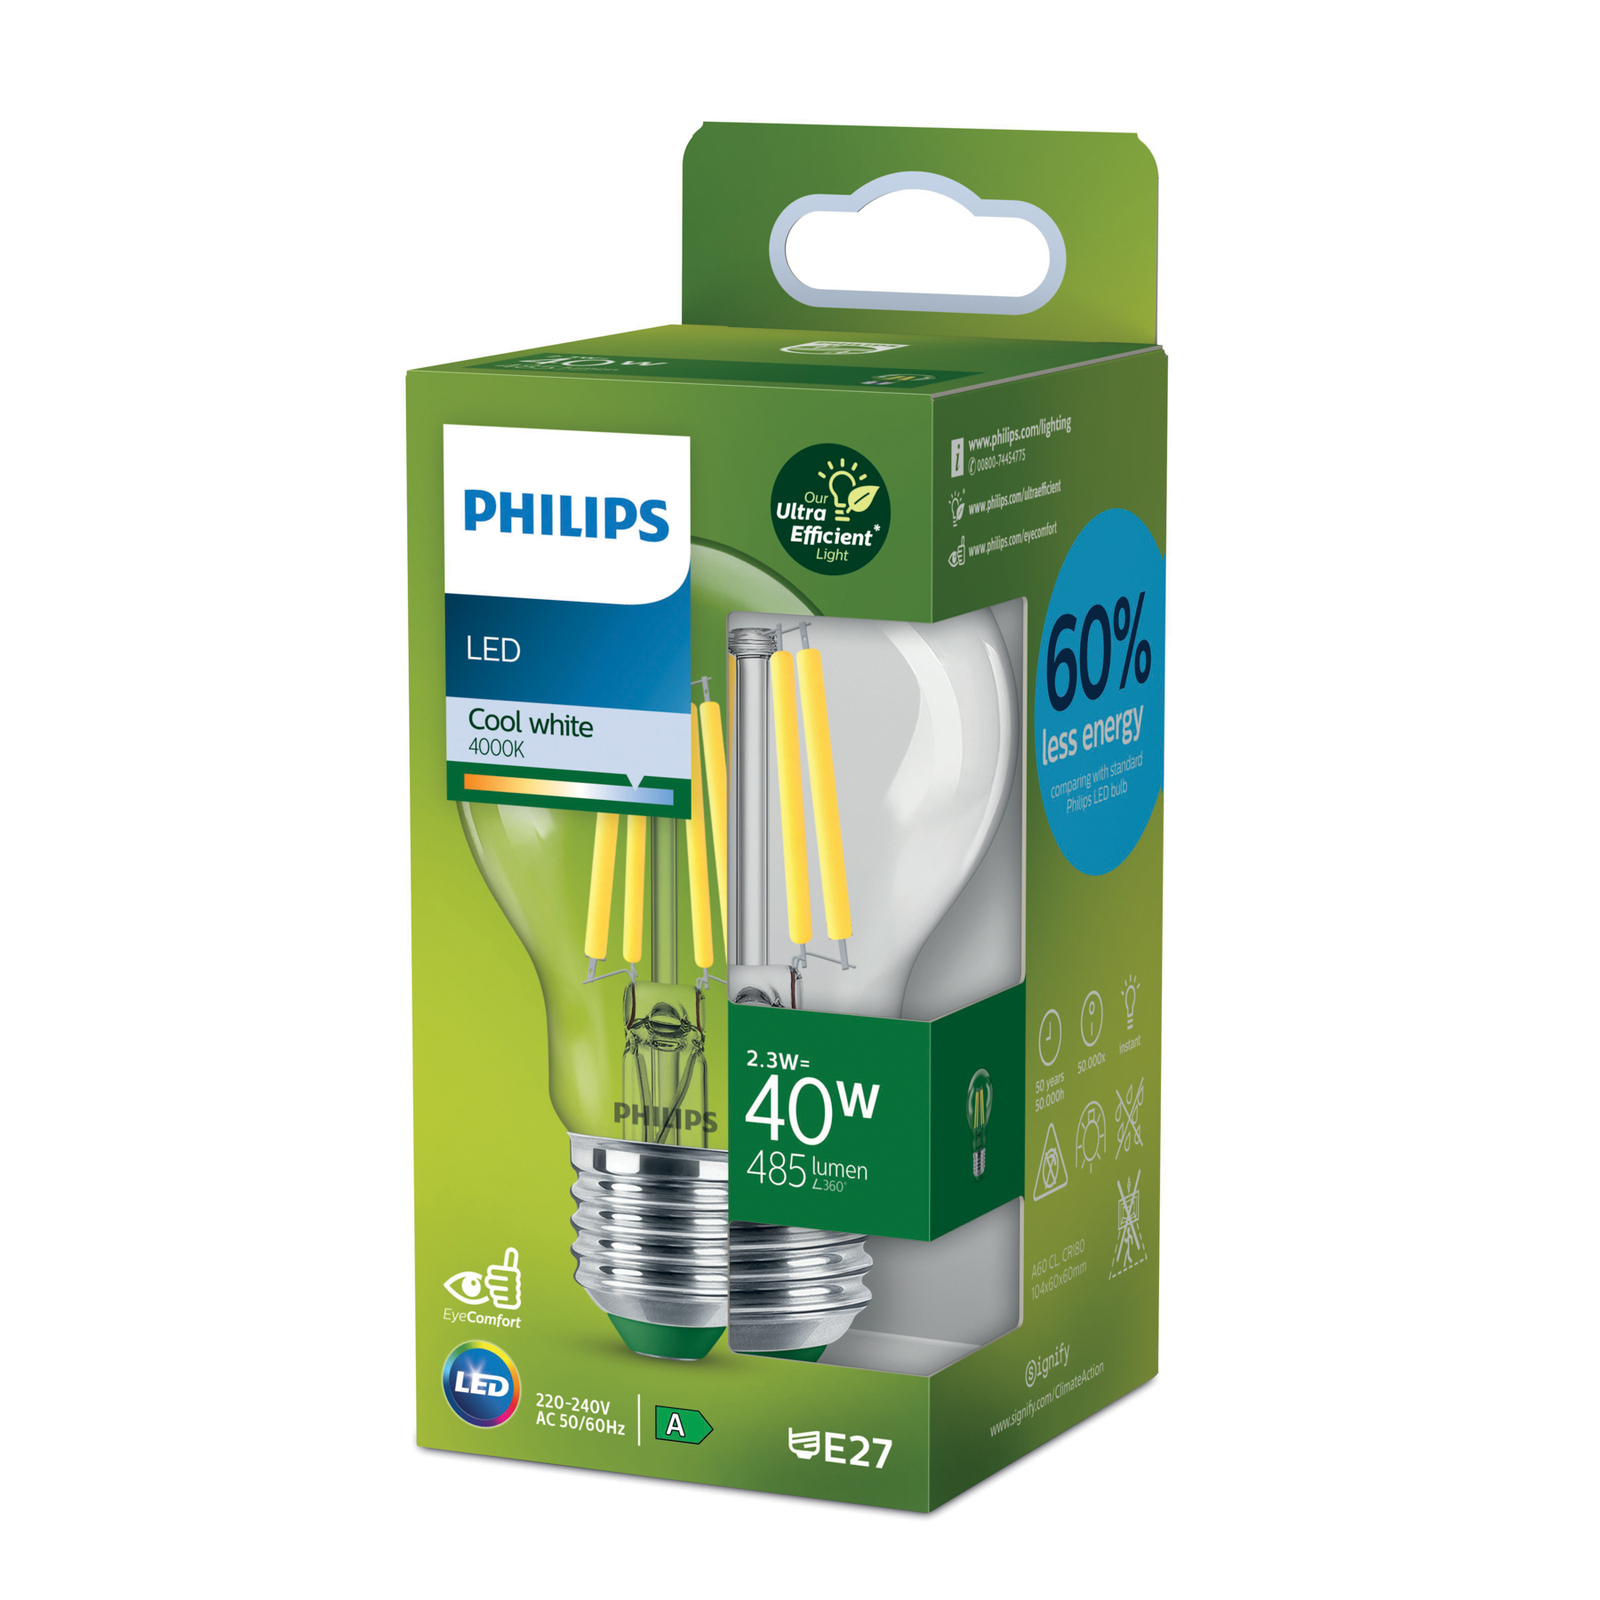 Philips E27 LED A60 2,3W 485lm 4 000K claire